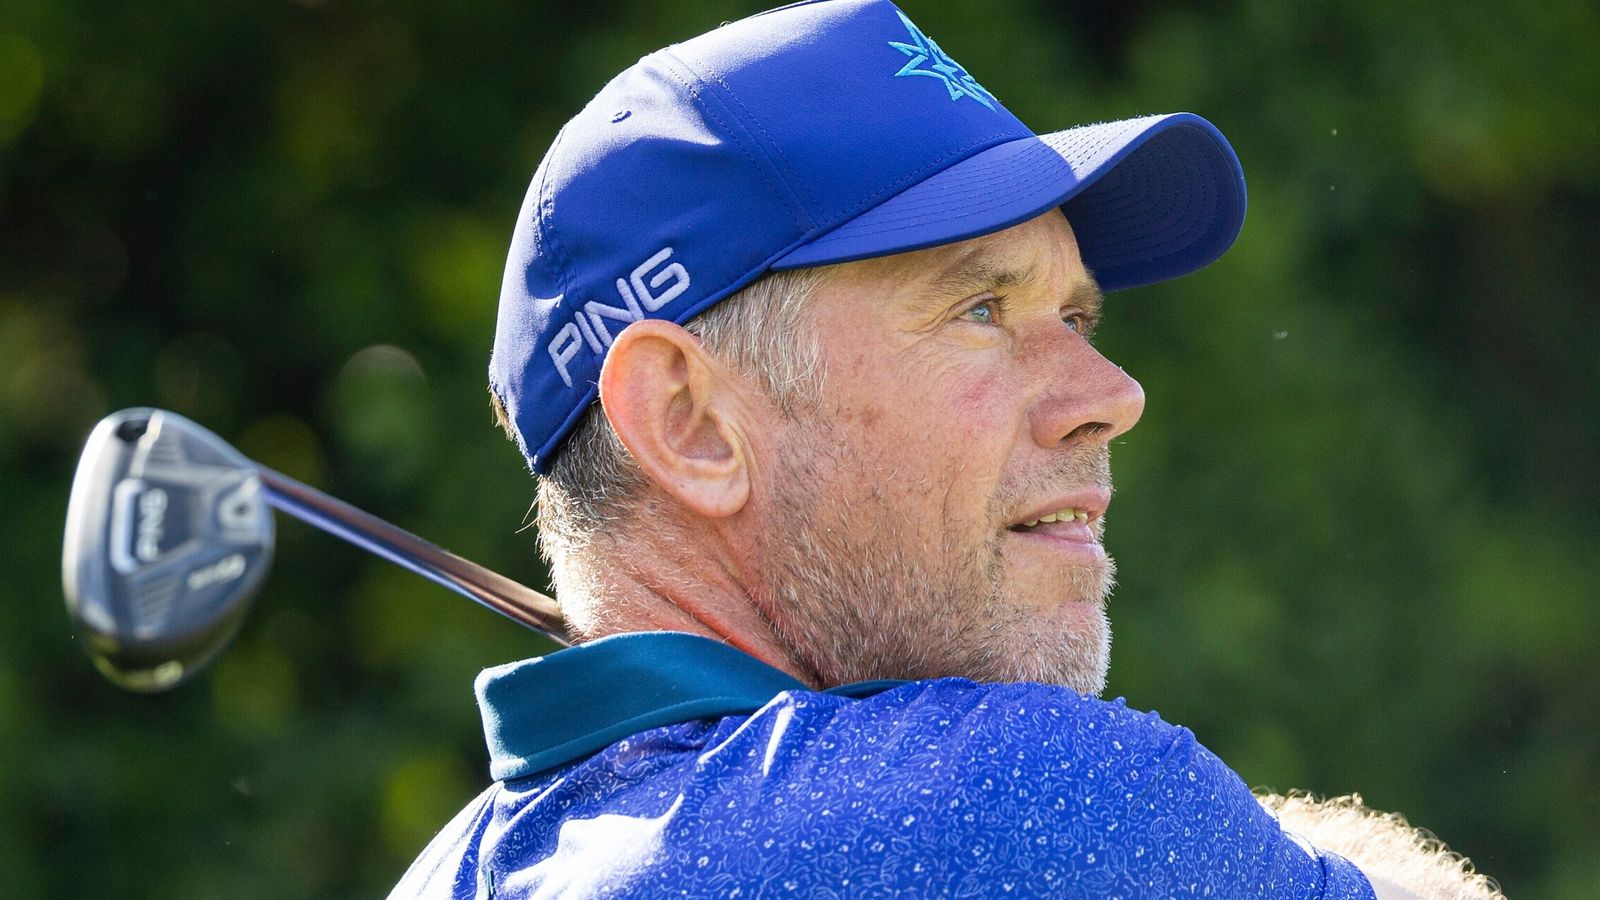 Lee Westwood criticises DP World Tour as ‘feeder’ to PGA Tour after membership resignation